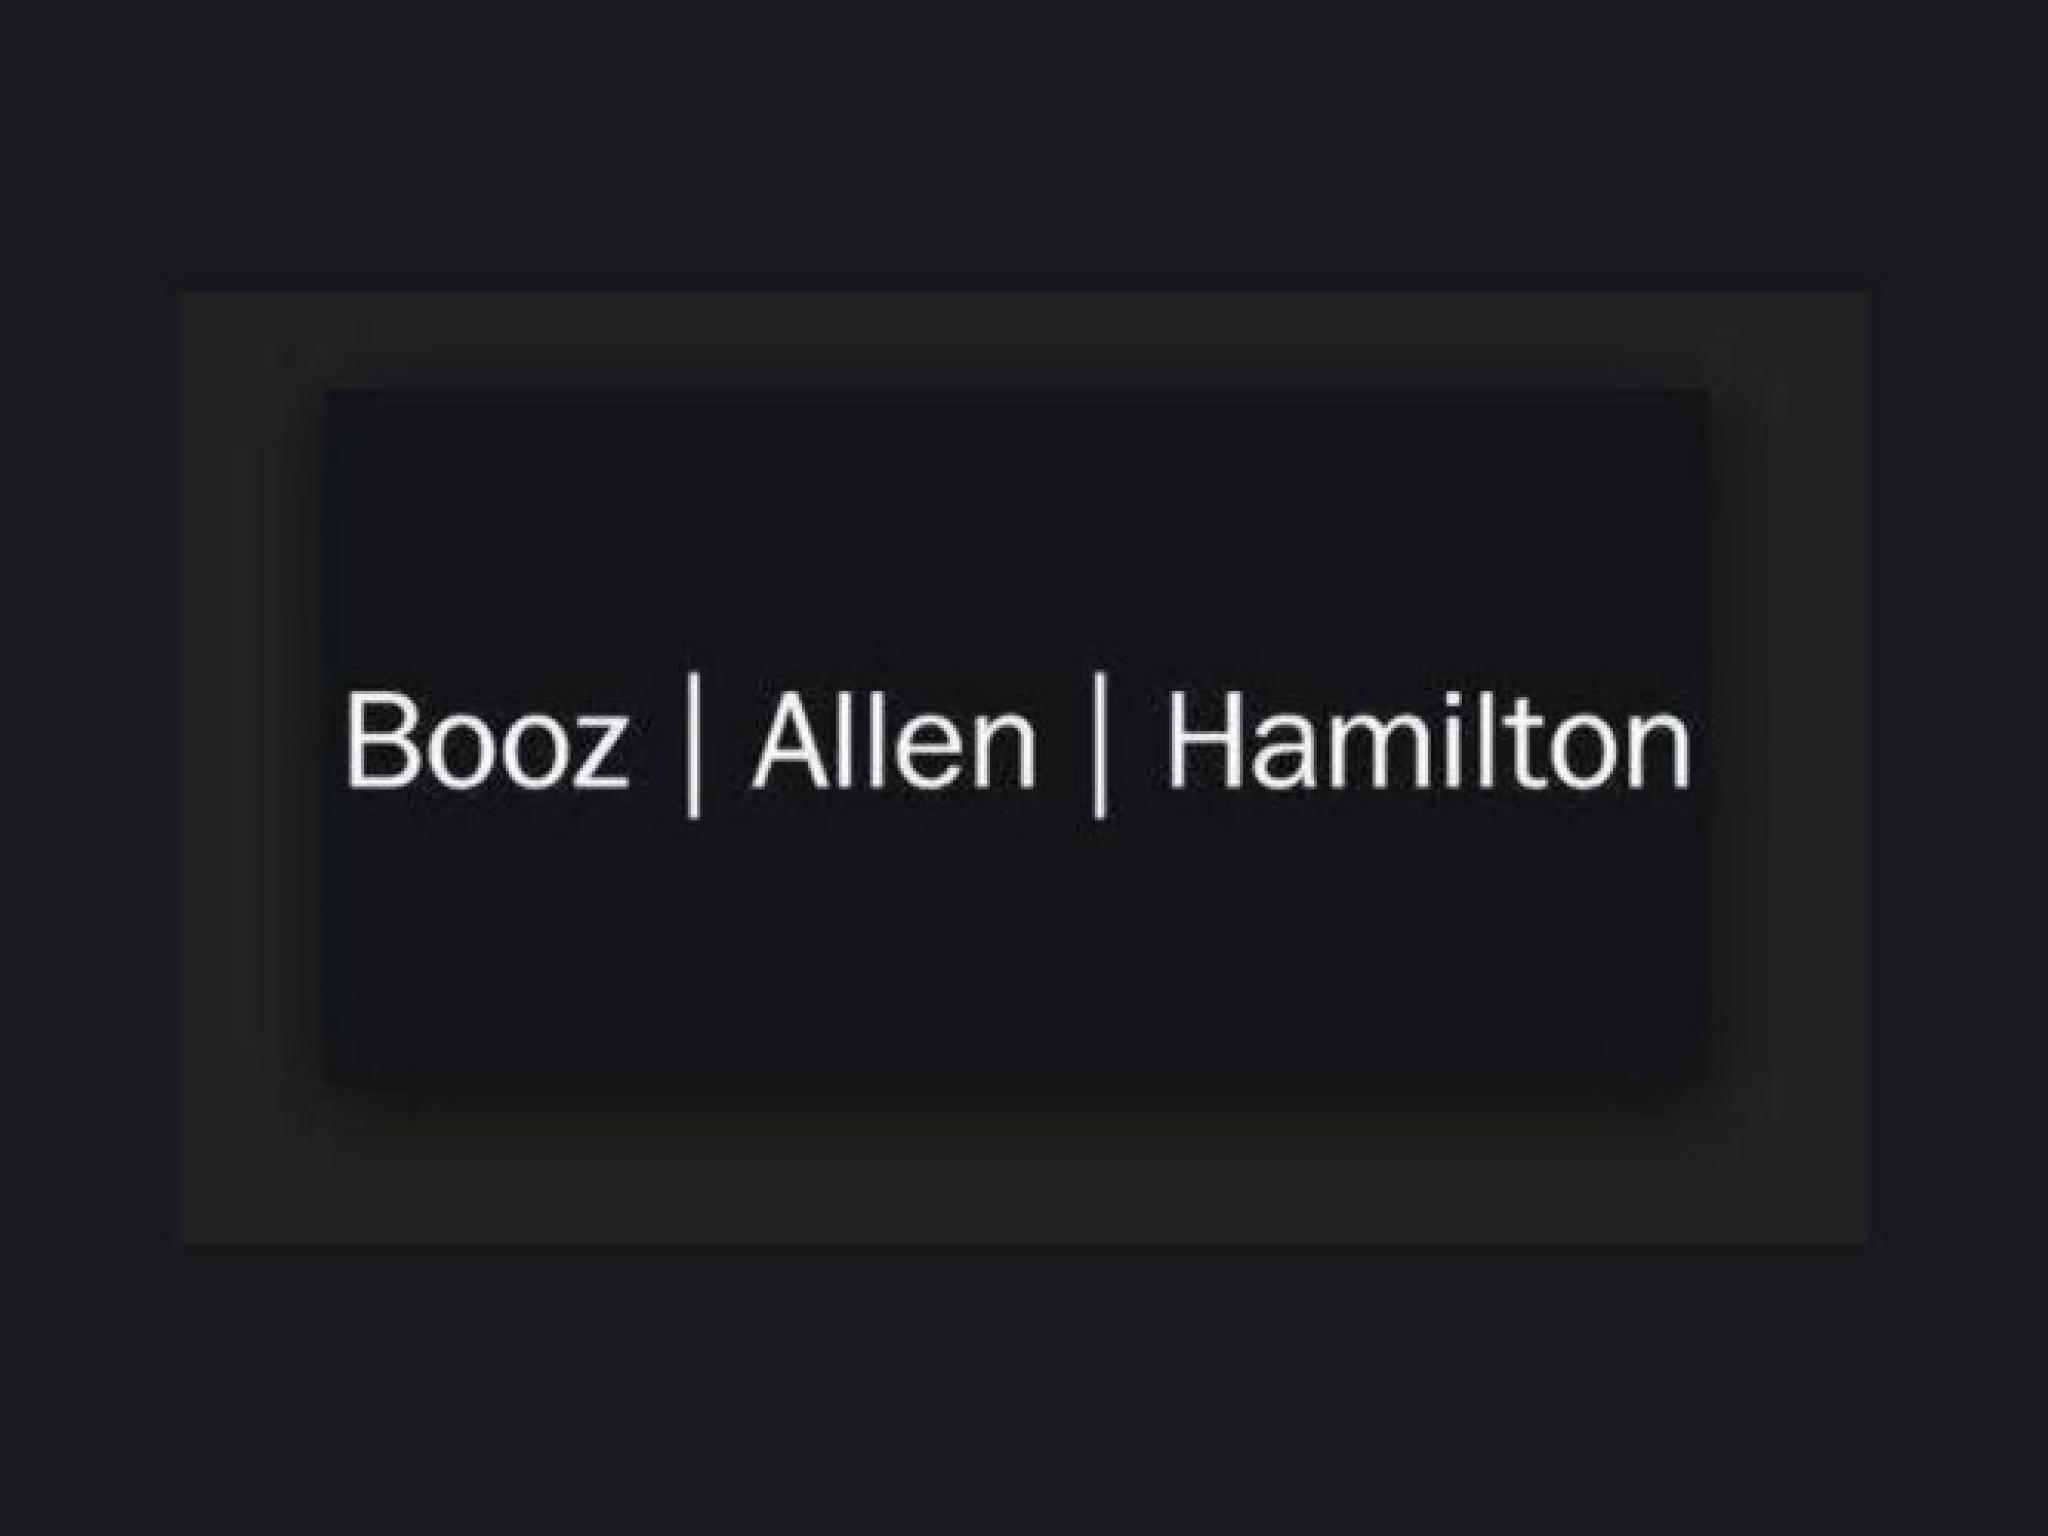  booz-allen-hamilton-likely-to-report-higher-q4-earnings-here-are-the-recent-forecast-changes-from-wall-streets-most-accurate-analysts 